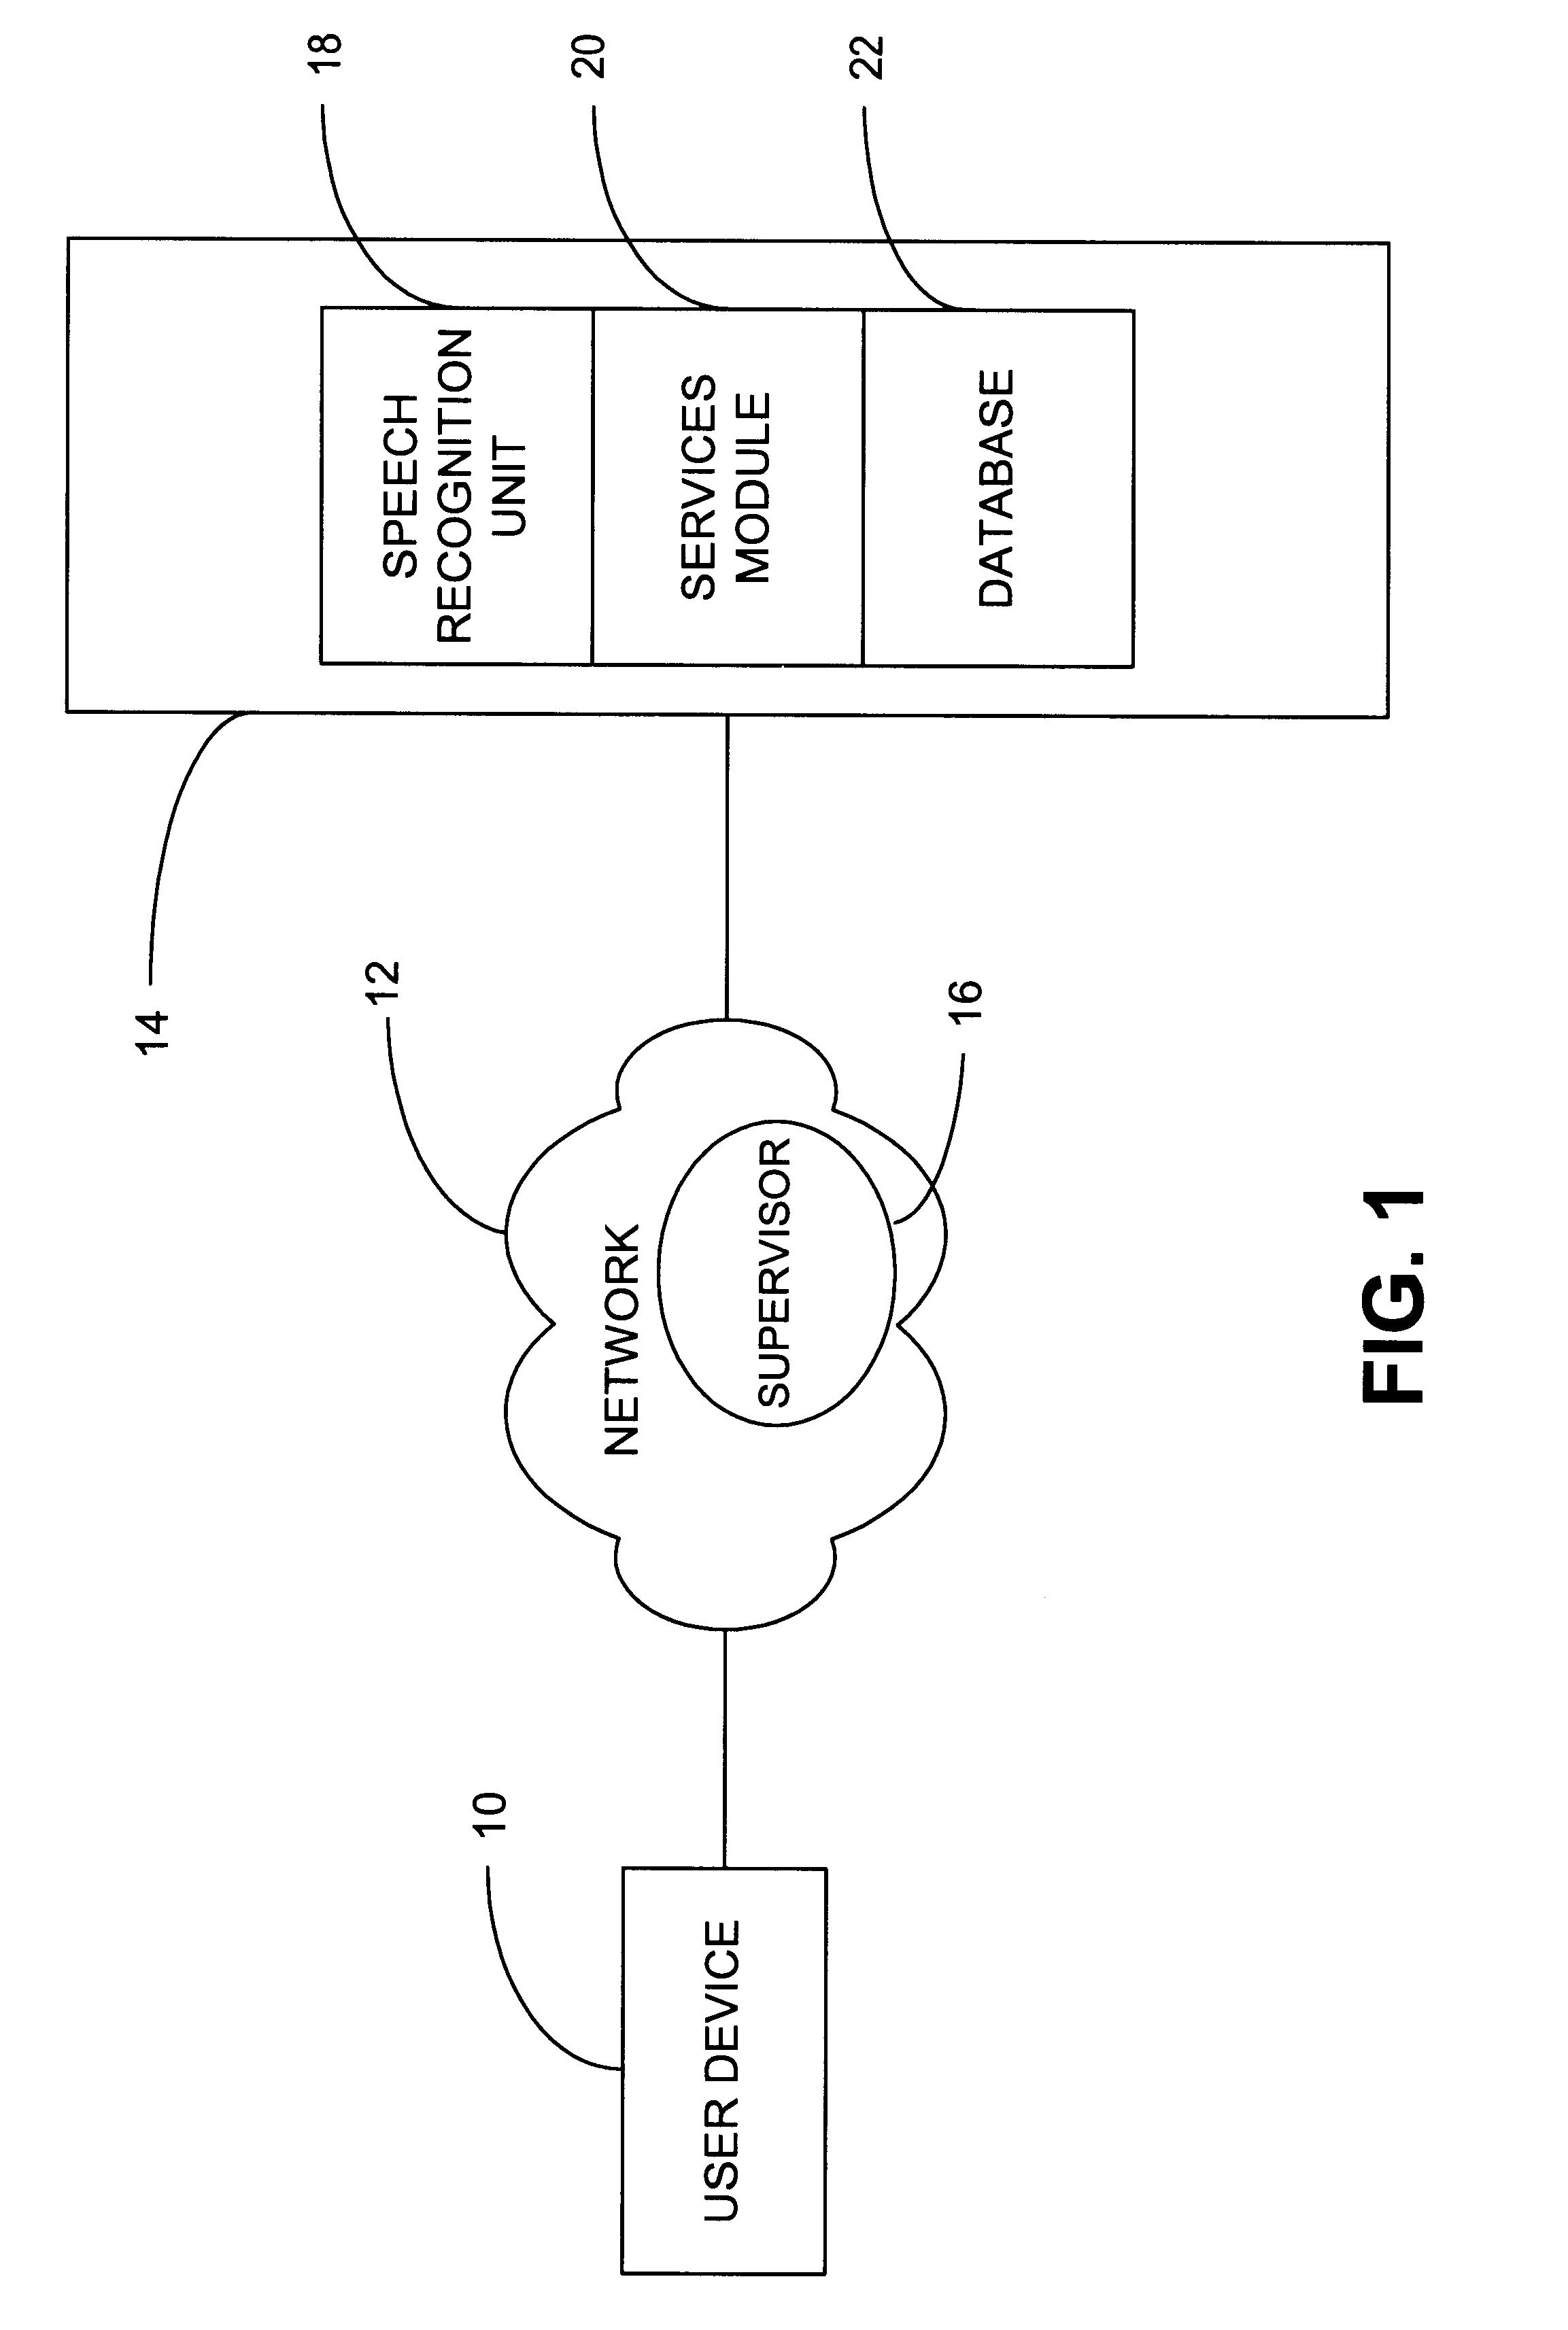 Speech recognition that adjusts automatically to input devices